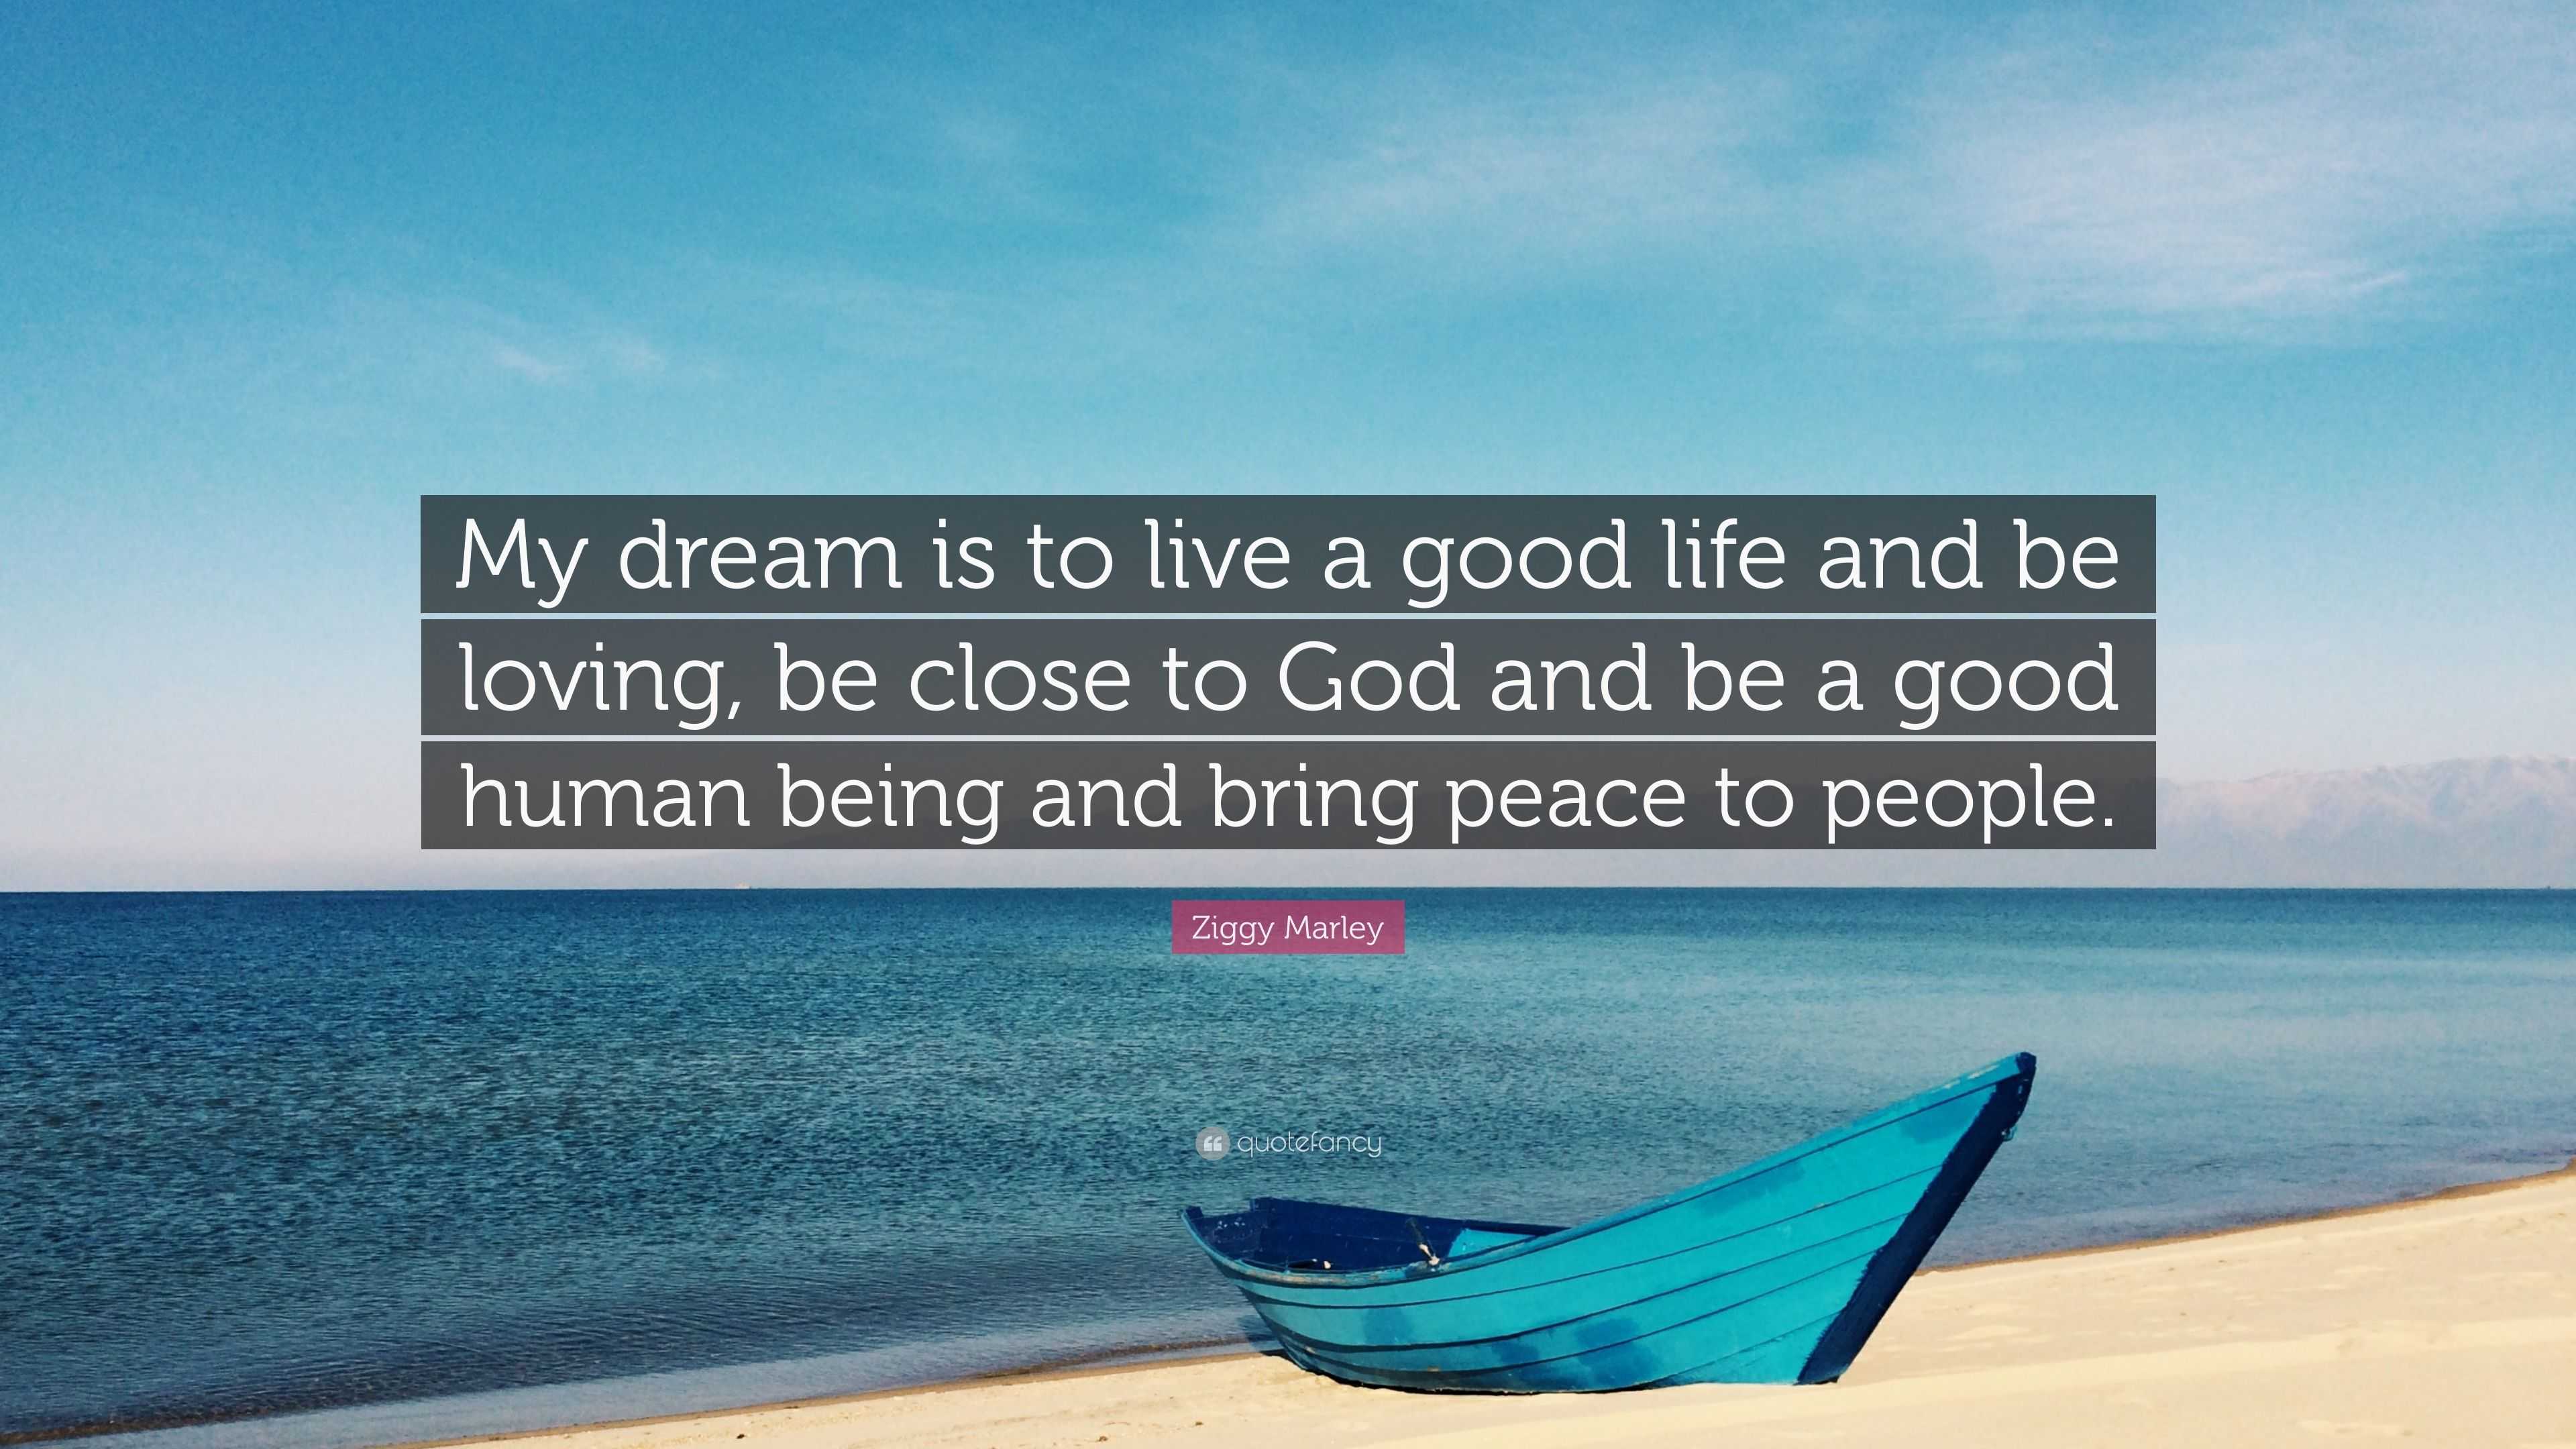 Ziggy Marley Quote: “My dream is to live a good life and be loving